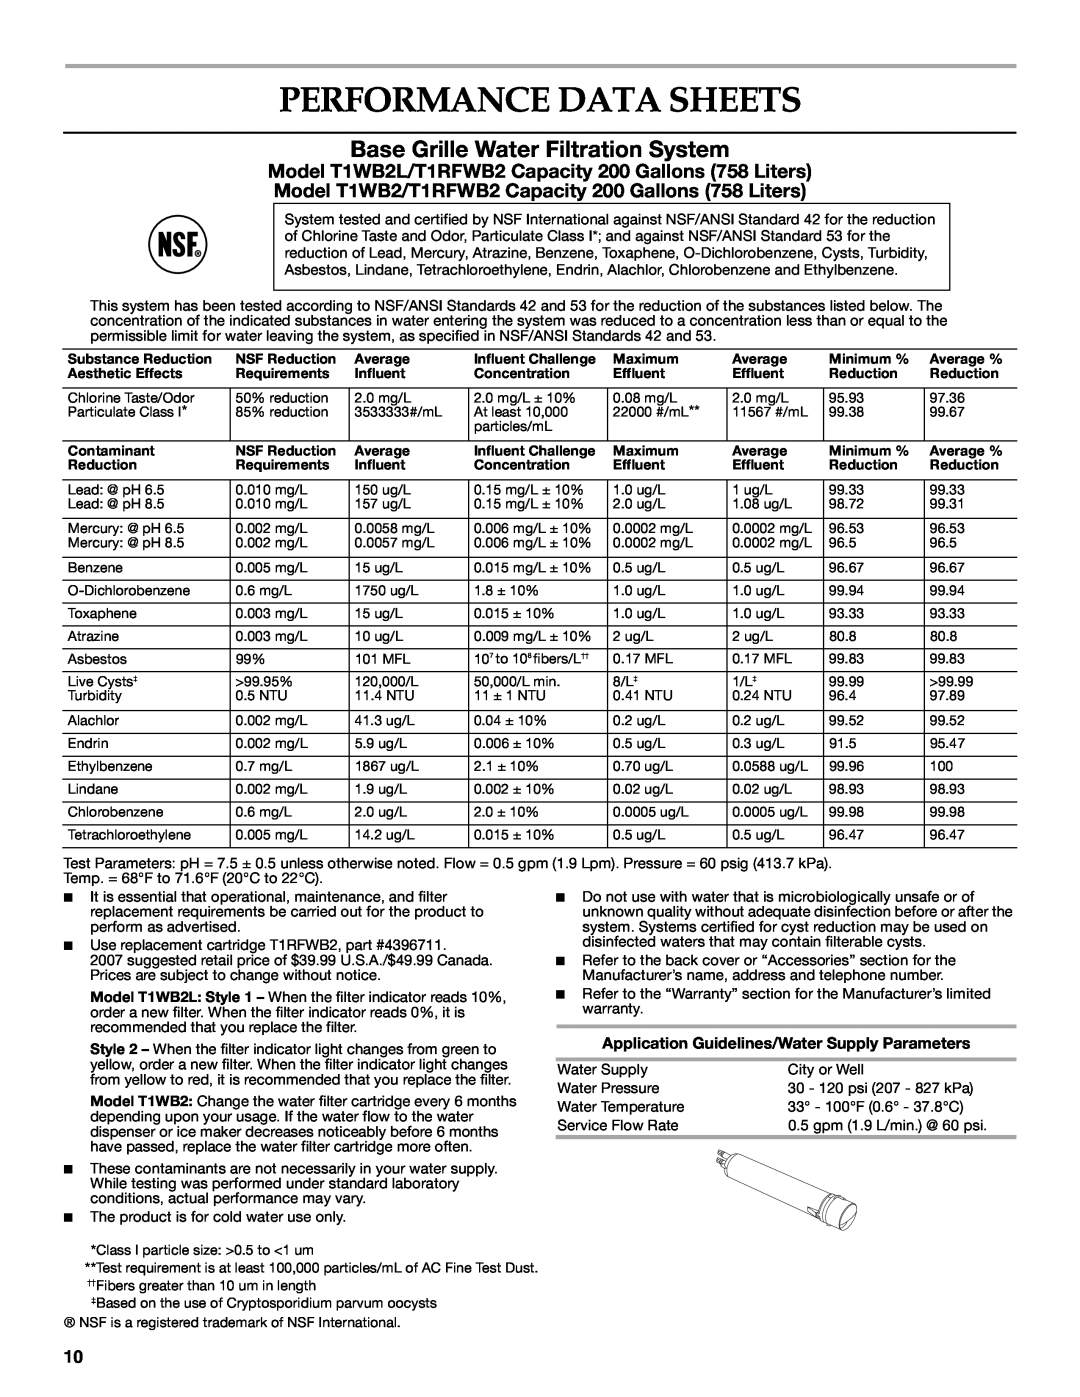 KitchenAid Counter Depth Side-by-Side Refrigerator warranty Performance Data Sheets, Base Grille Water Filtration System 